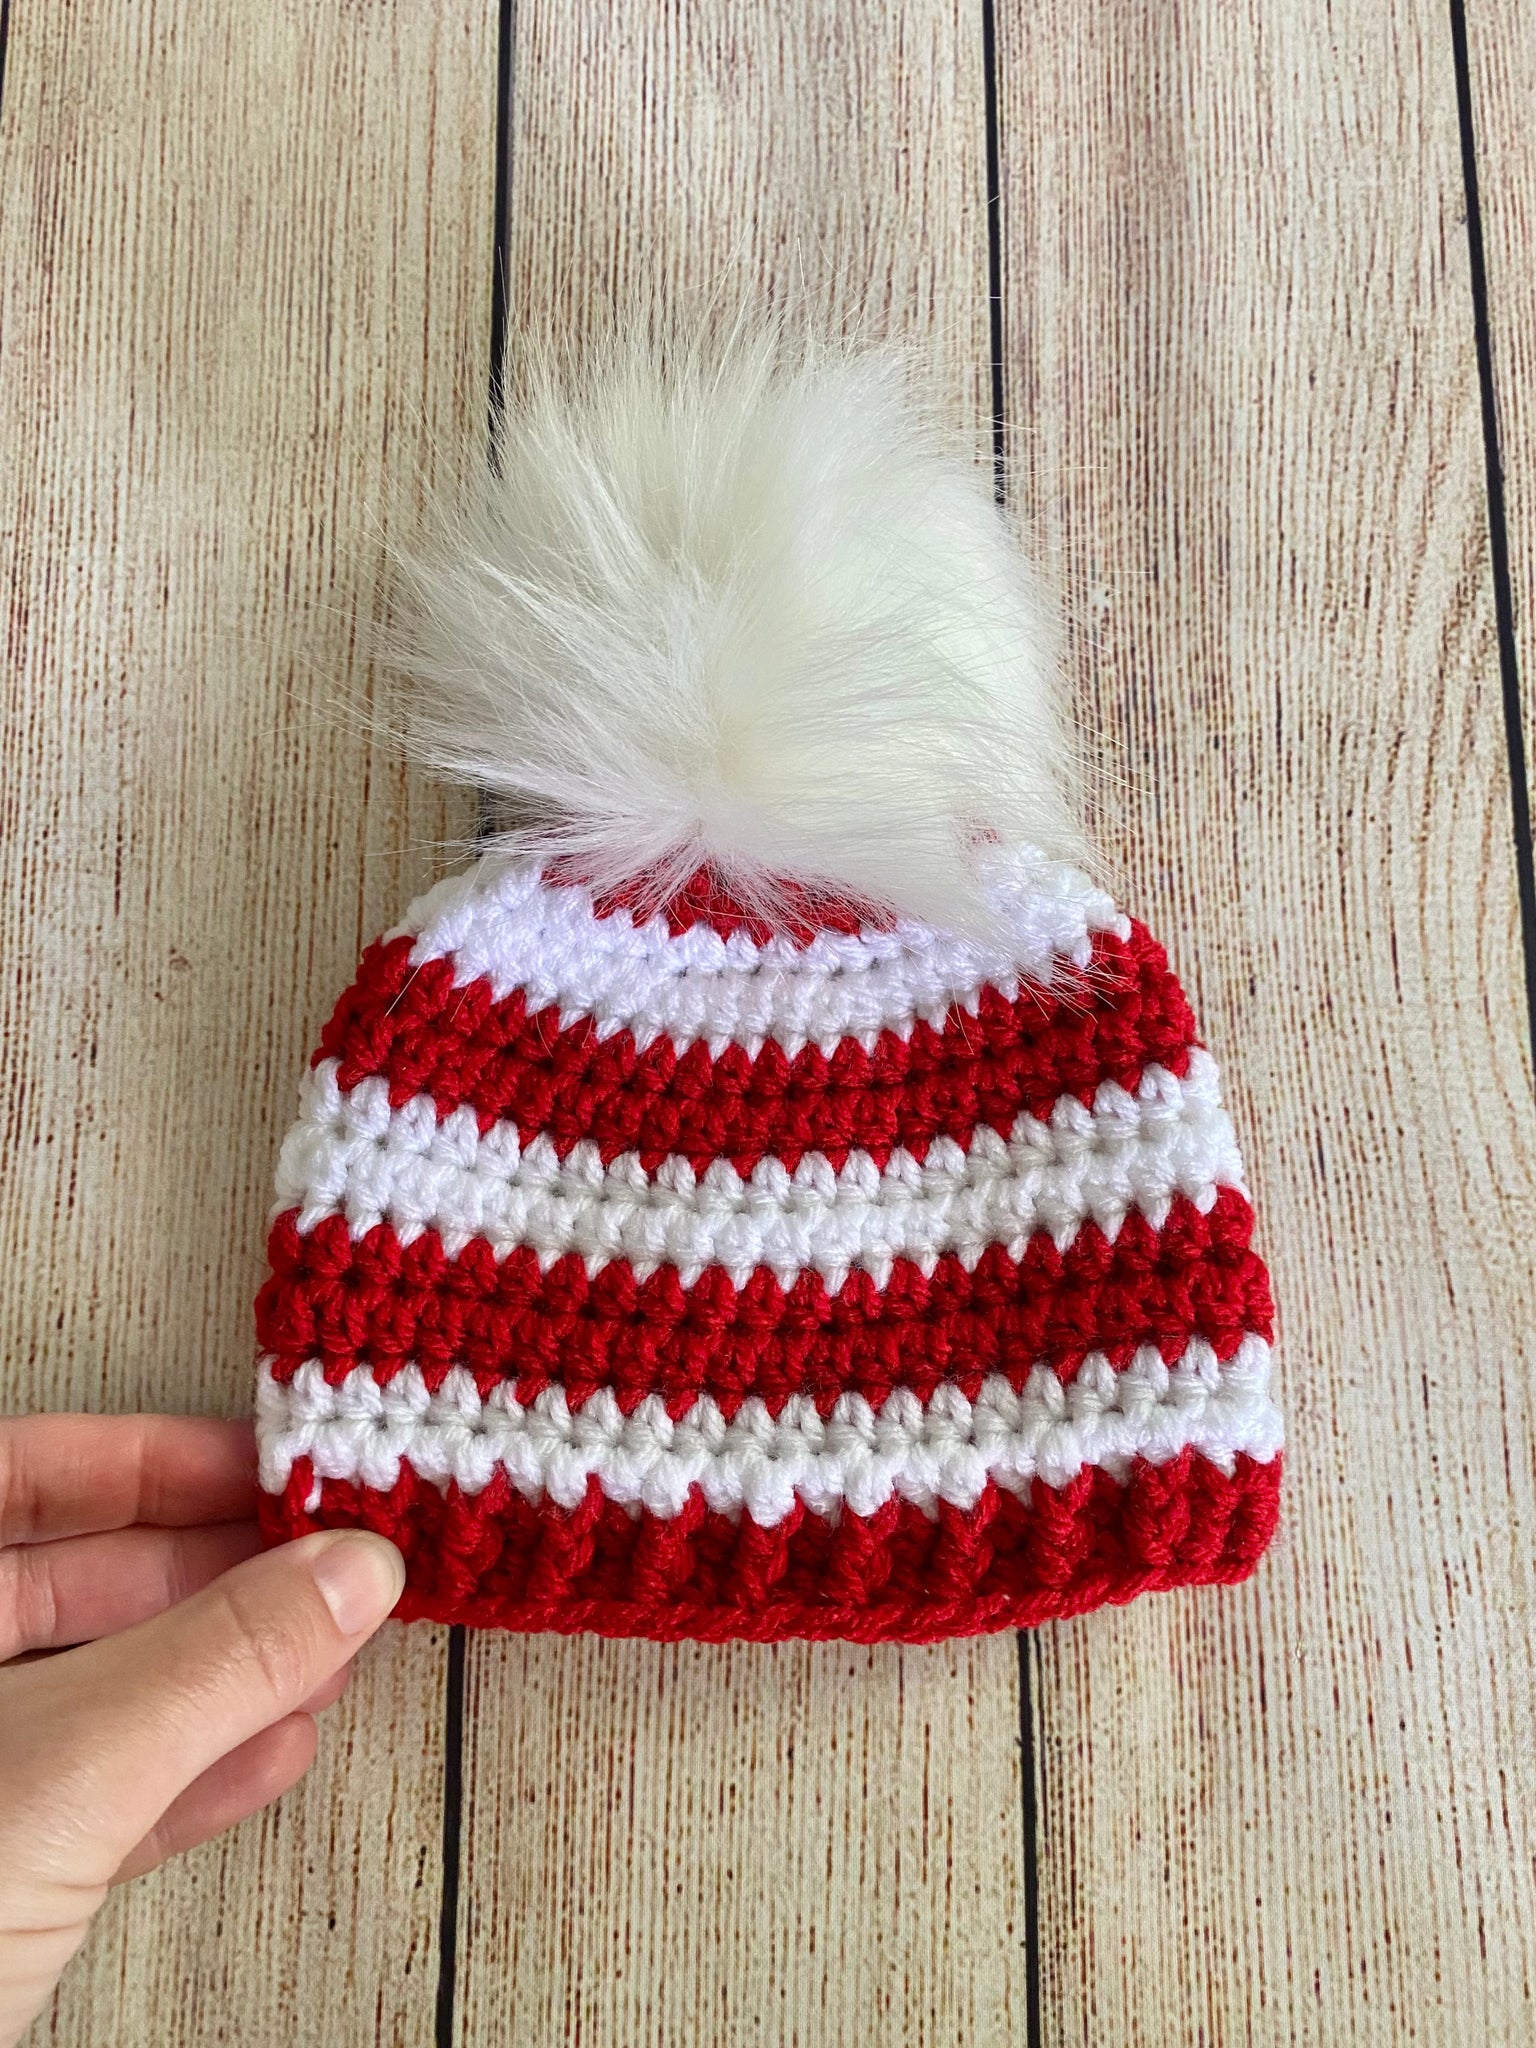 Red and white faux fur pom pom striped Christmas hat by Two Seaside Babes